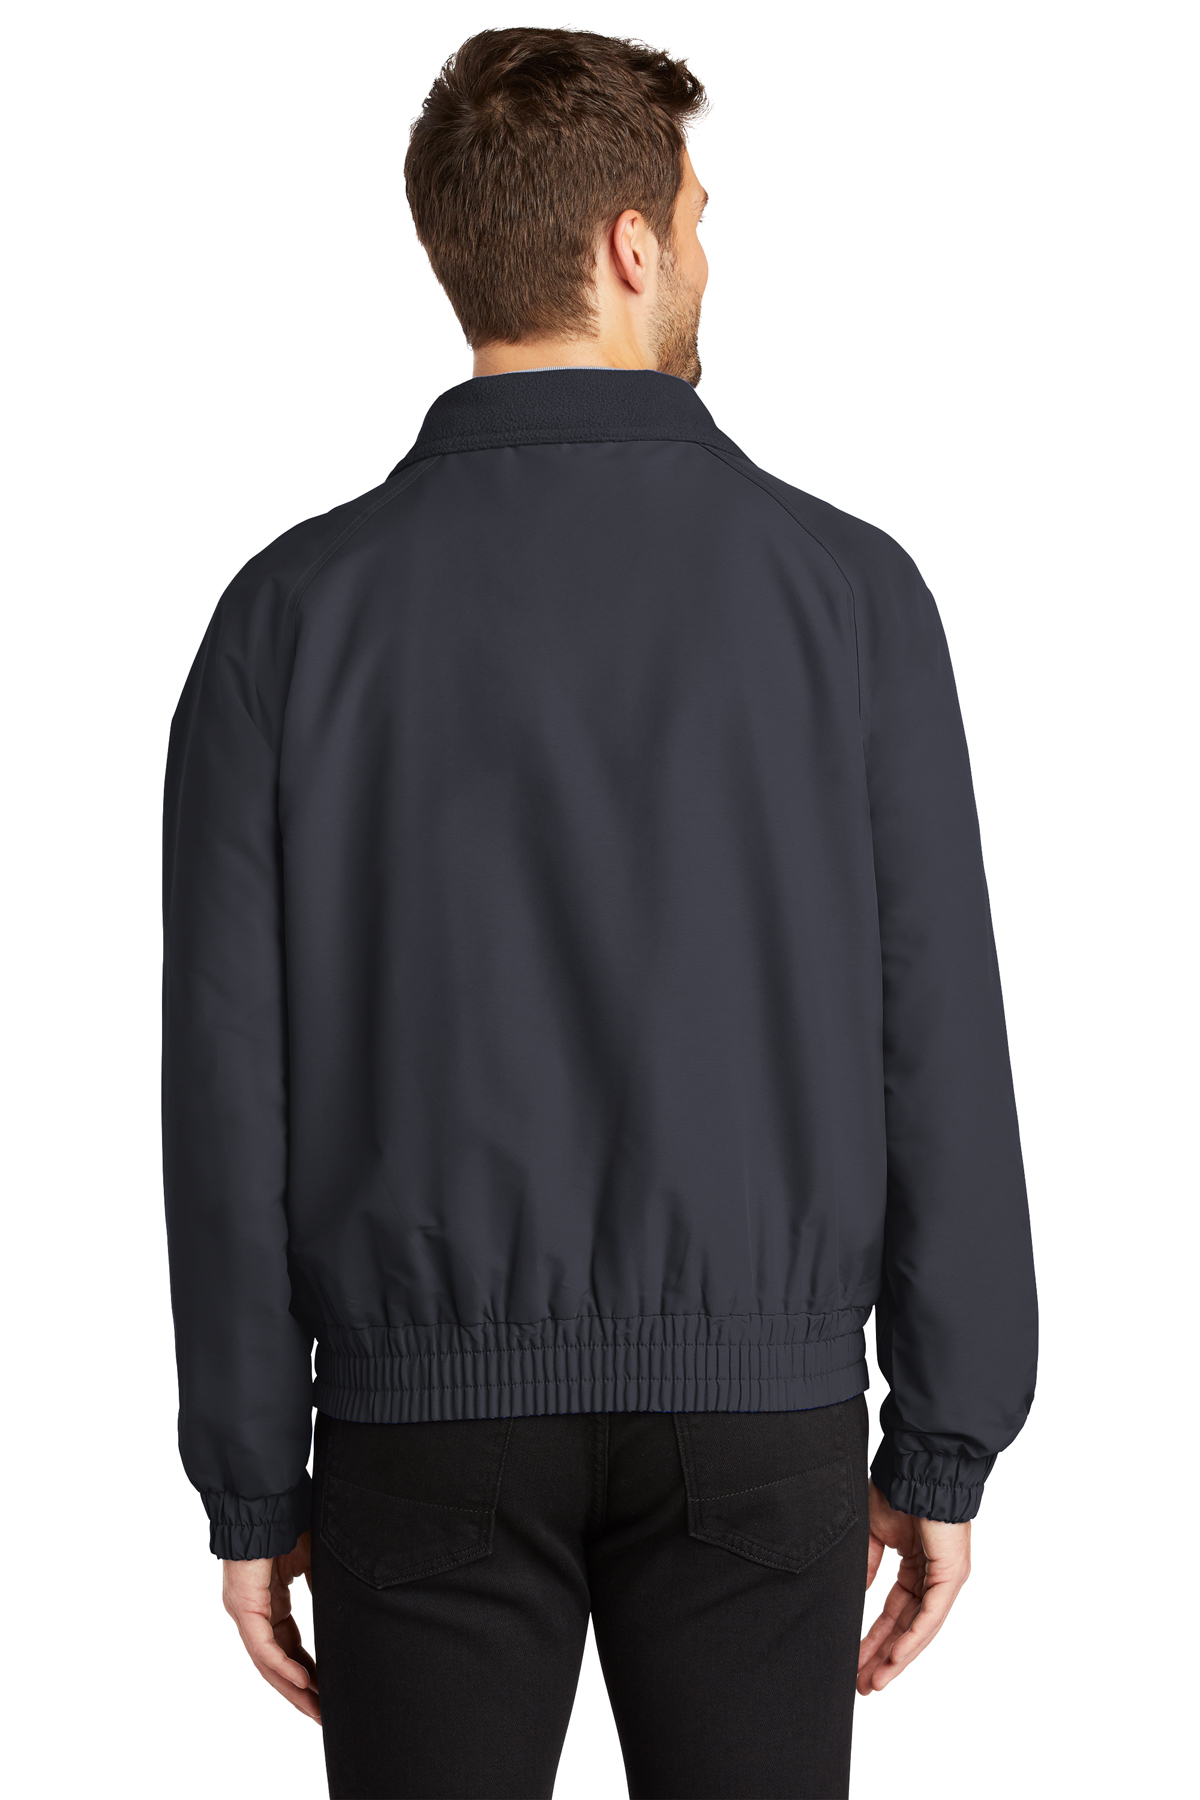 Port Authority Lightweight Charger Jacket | Product | Company Casuals